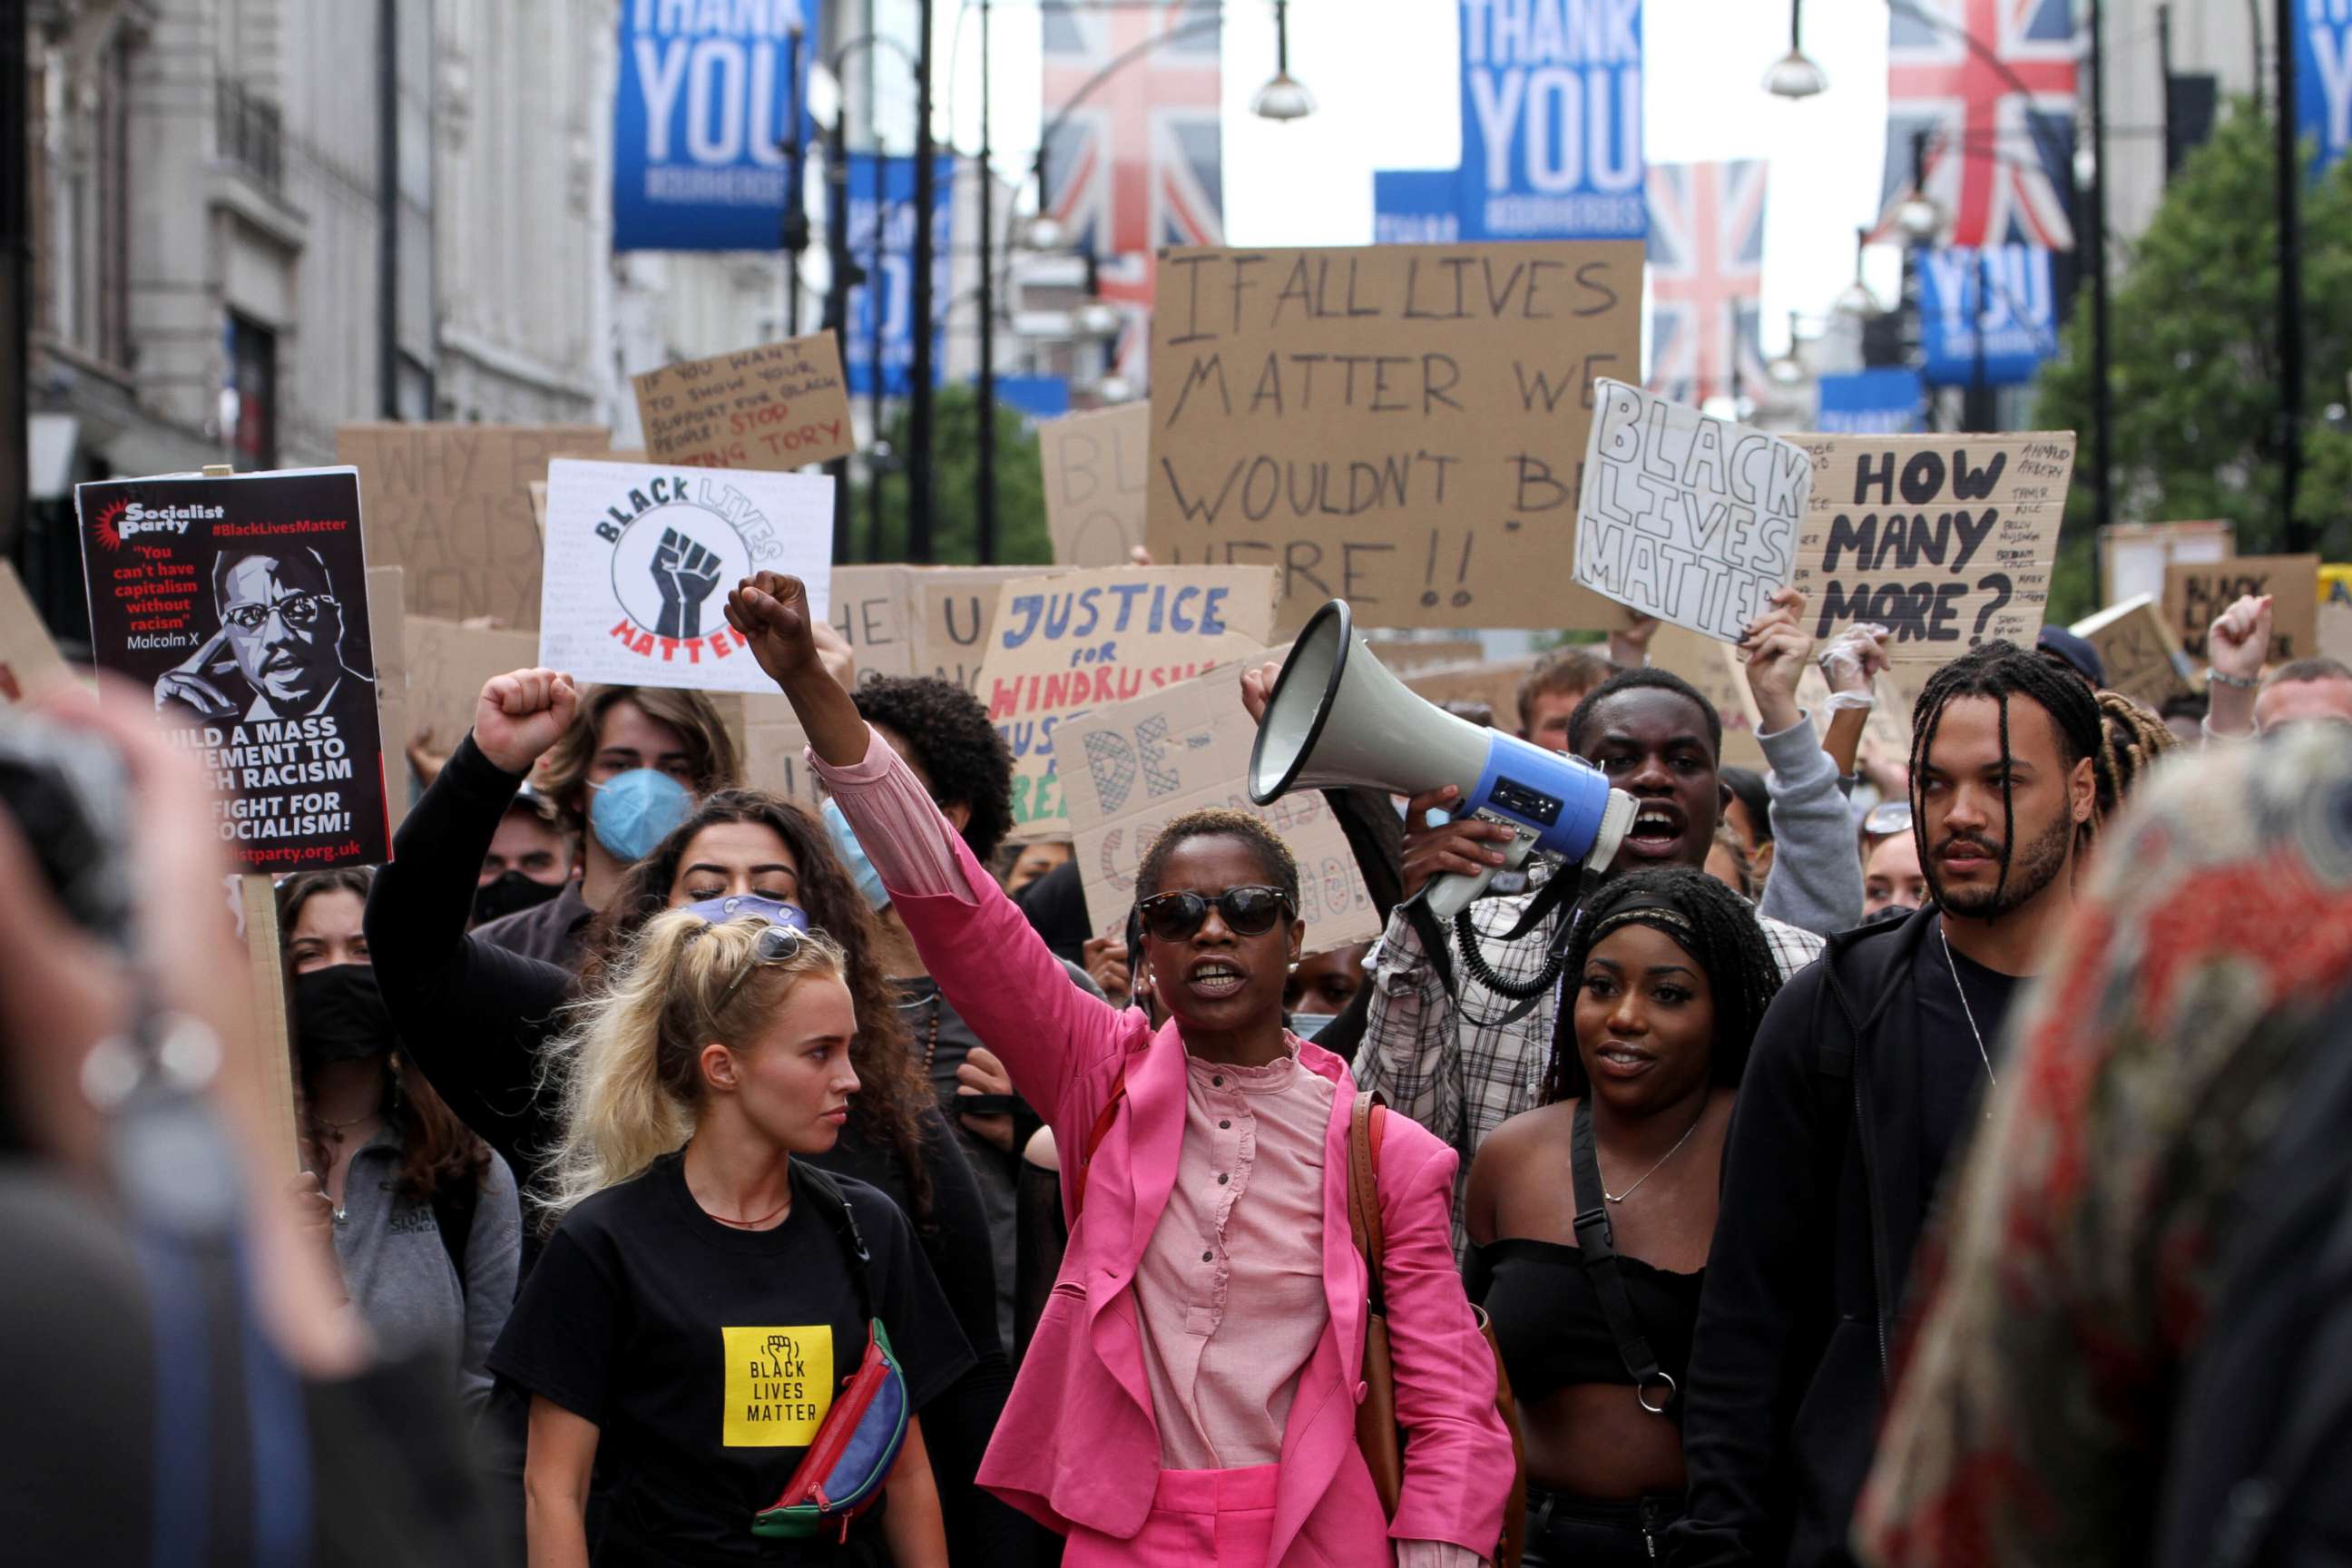 PHOTO: Black Lives Matter demonstrators march through Oxford Street during a protest, June 21, 2020, in London.